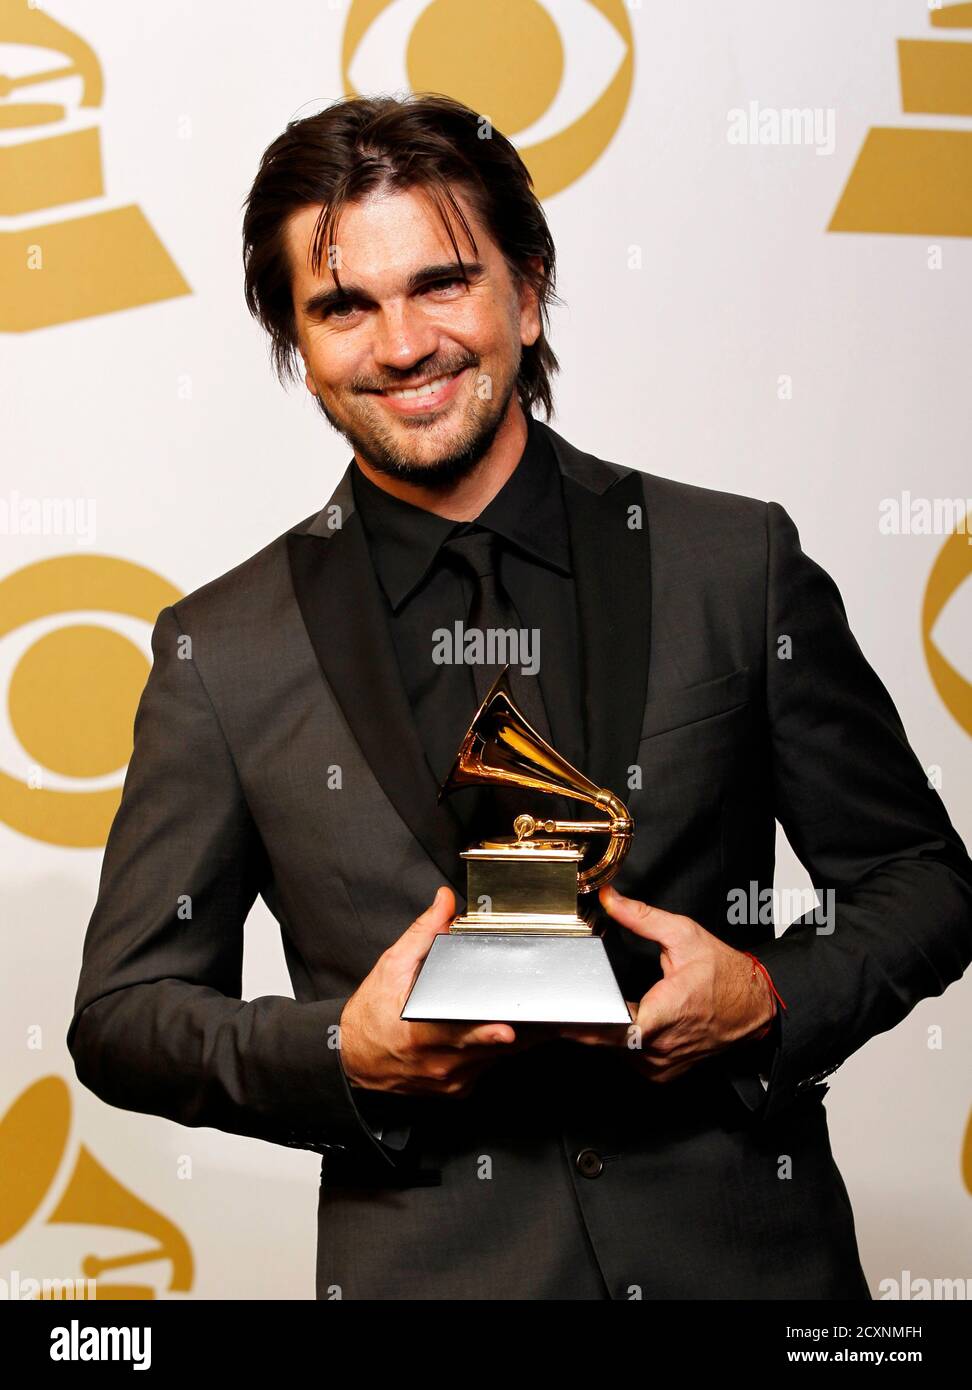 Juanes holds the award he won for Best Latin Pop Album for "MTV Unplugged  Deluxe Edition" backstage at the 55th annual Grammy Awards in Los Angeles,  California February 10, 2013. REUTERS/Mario Anzuoni (